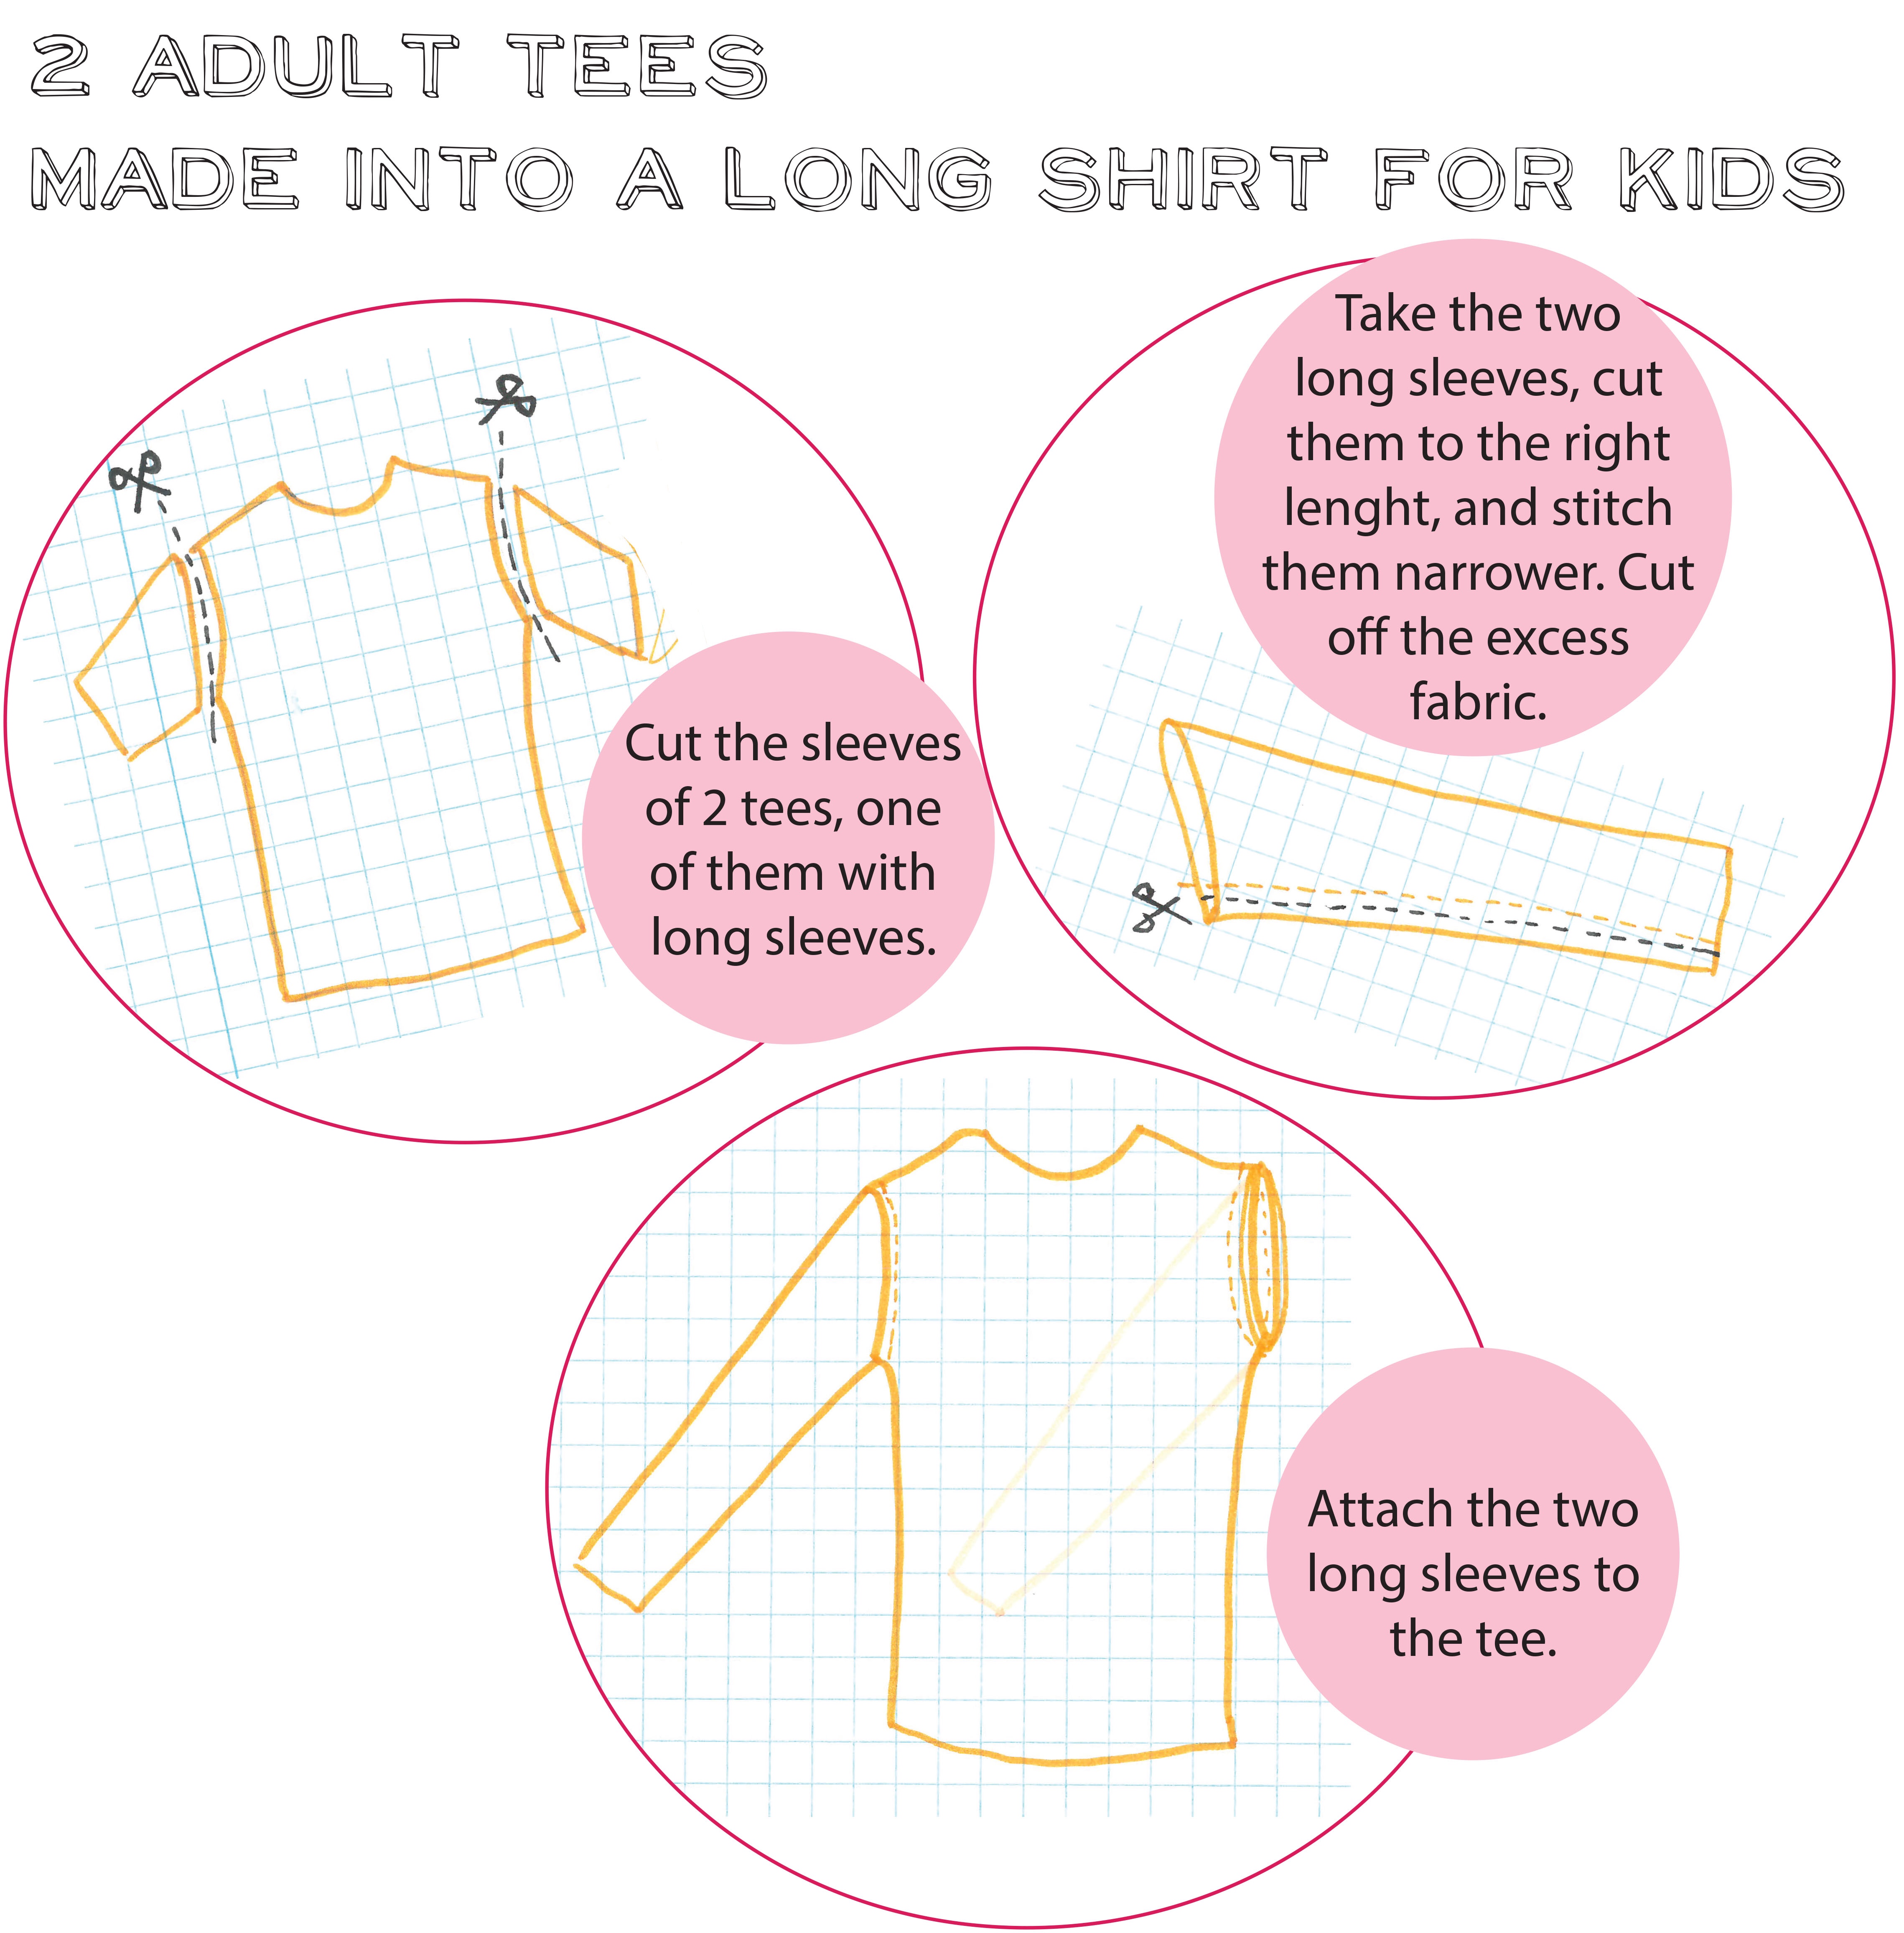 refashioning styles for kids